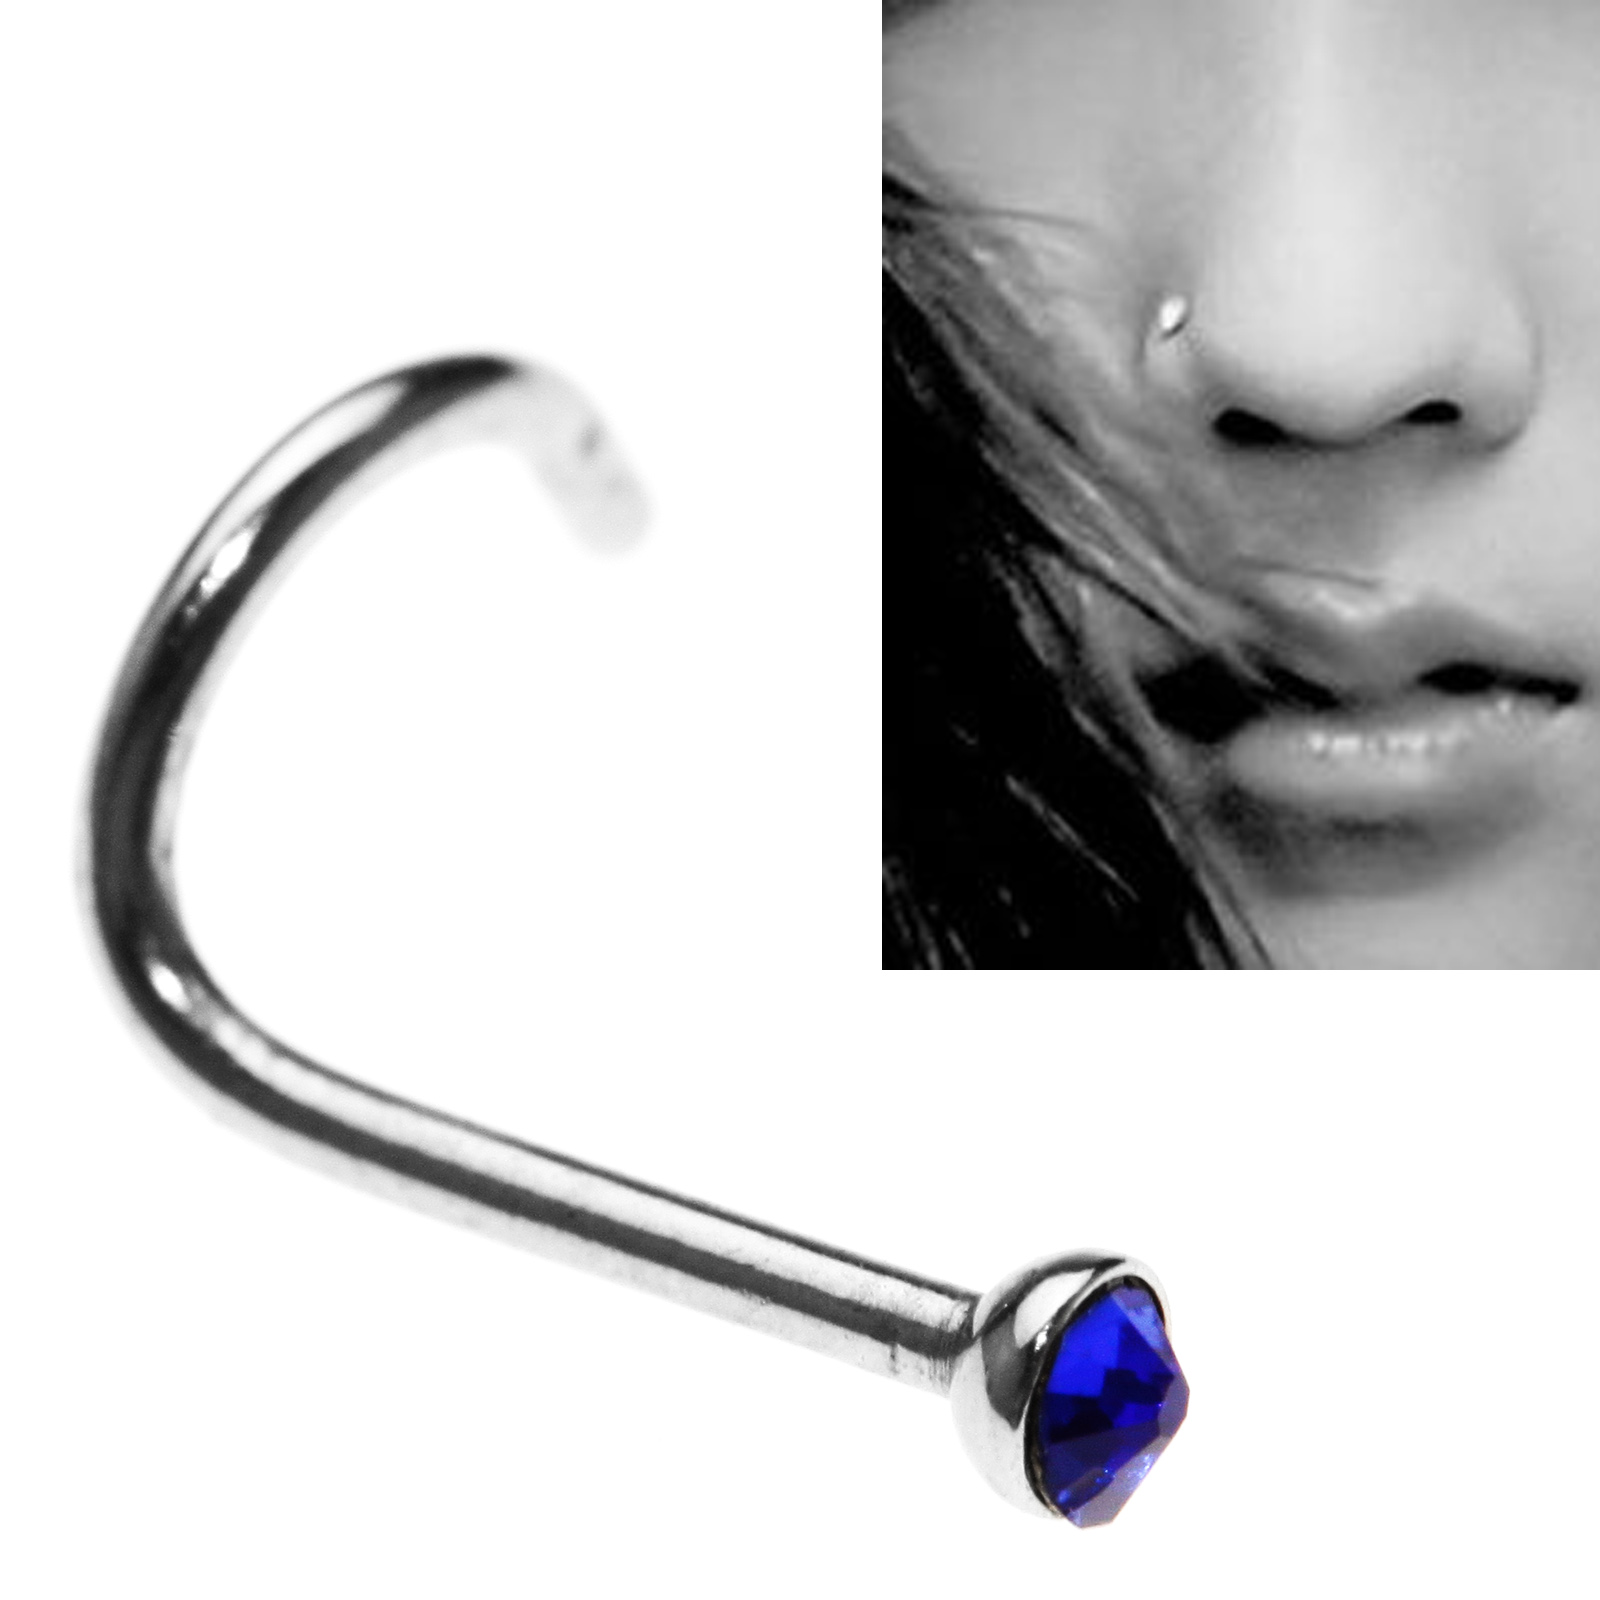 20x Mix Colour Surgical Steel Piercing Nose Ring Tiny Twist Screw Stud